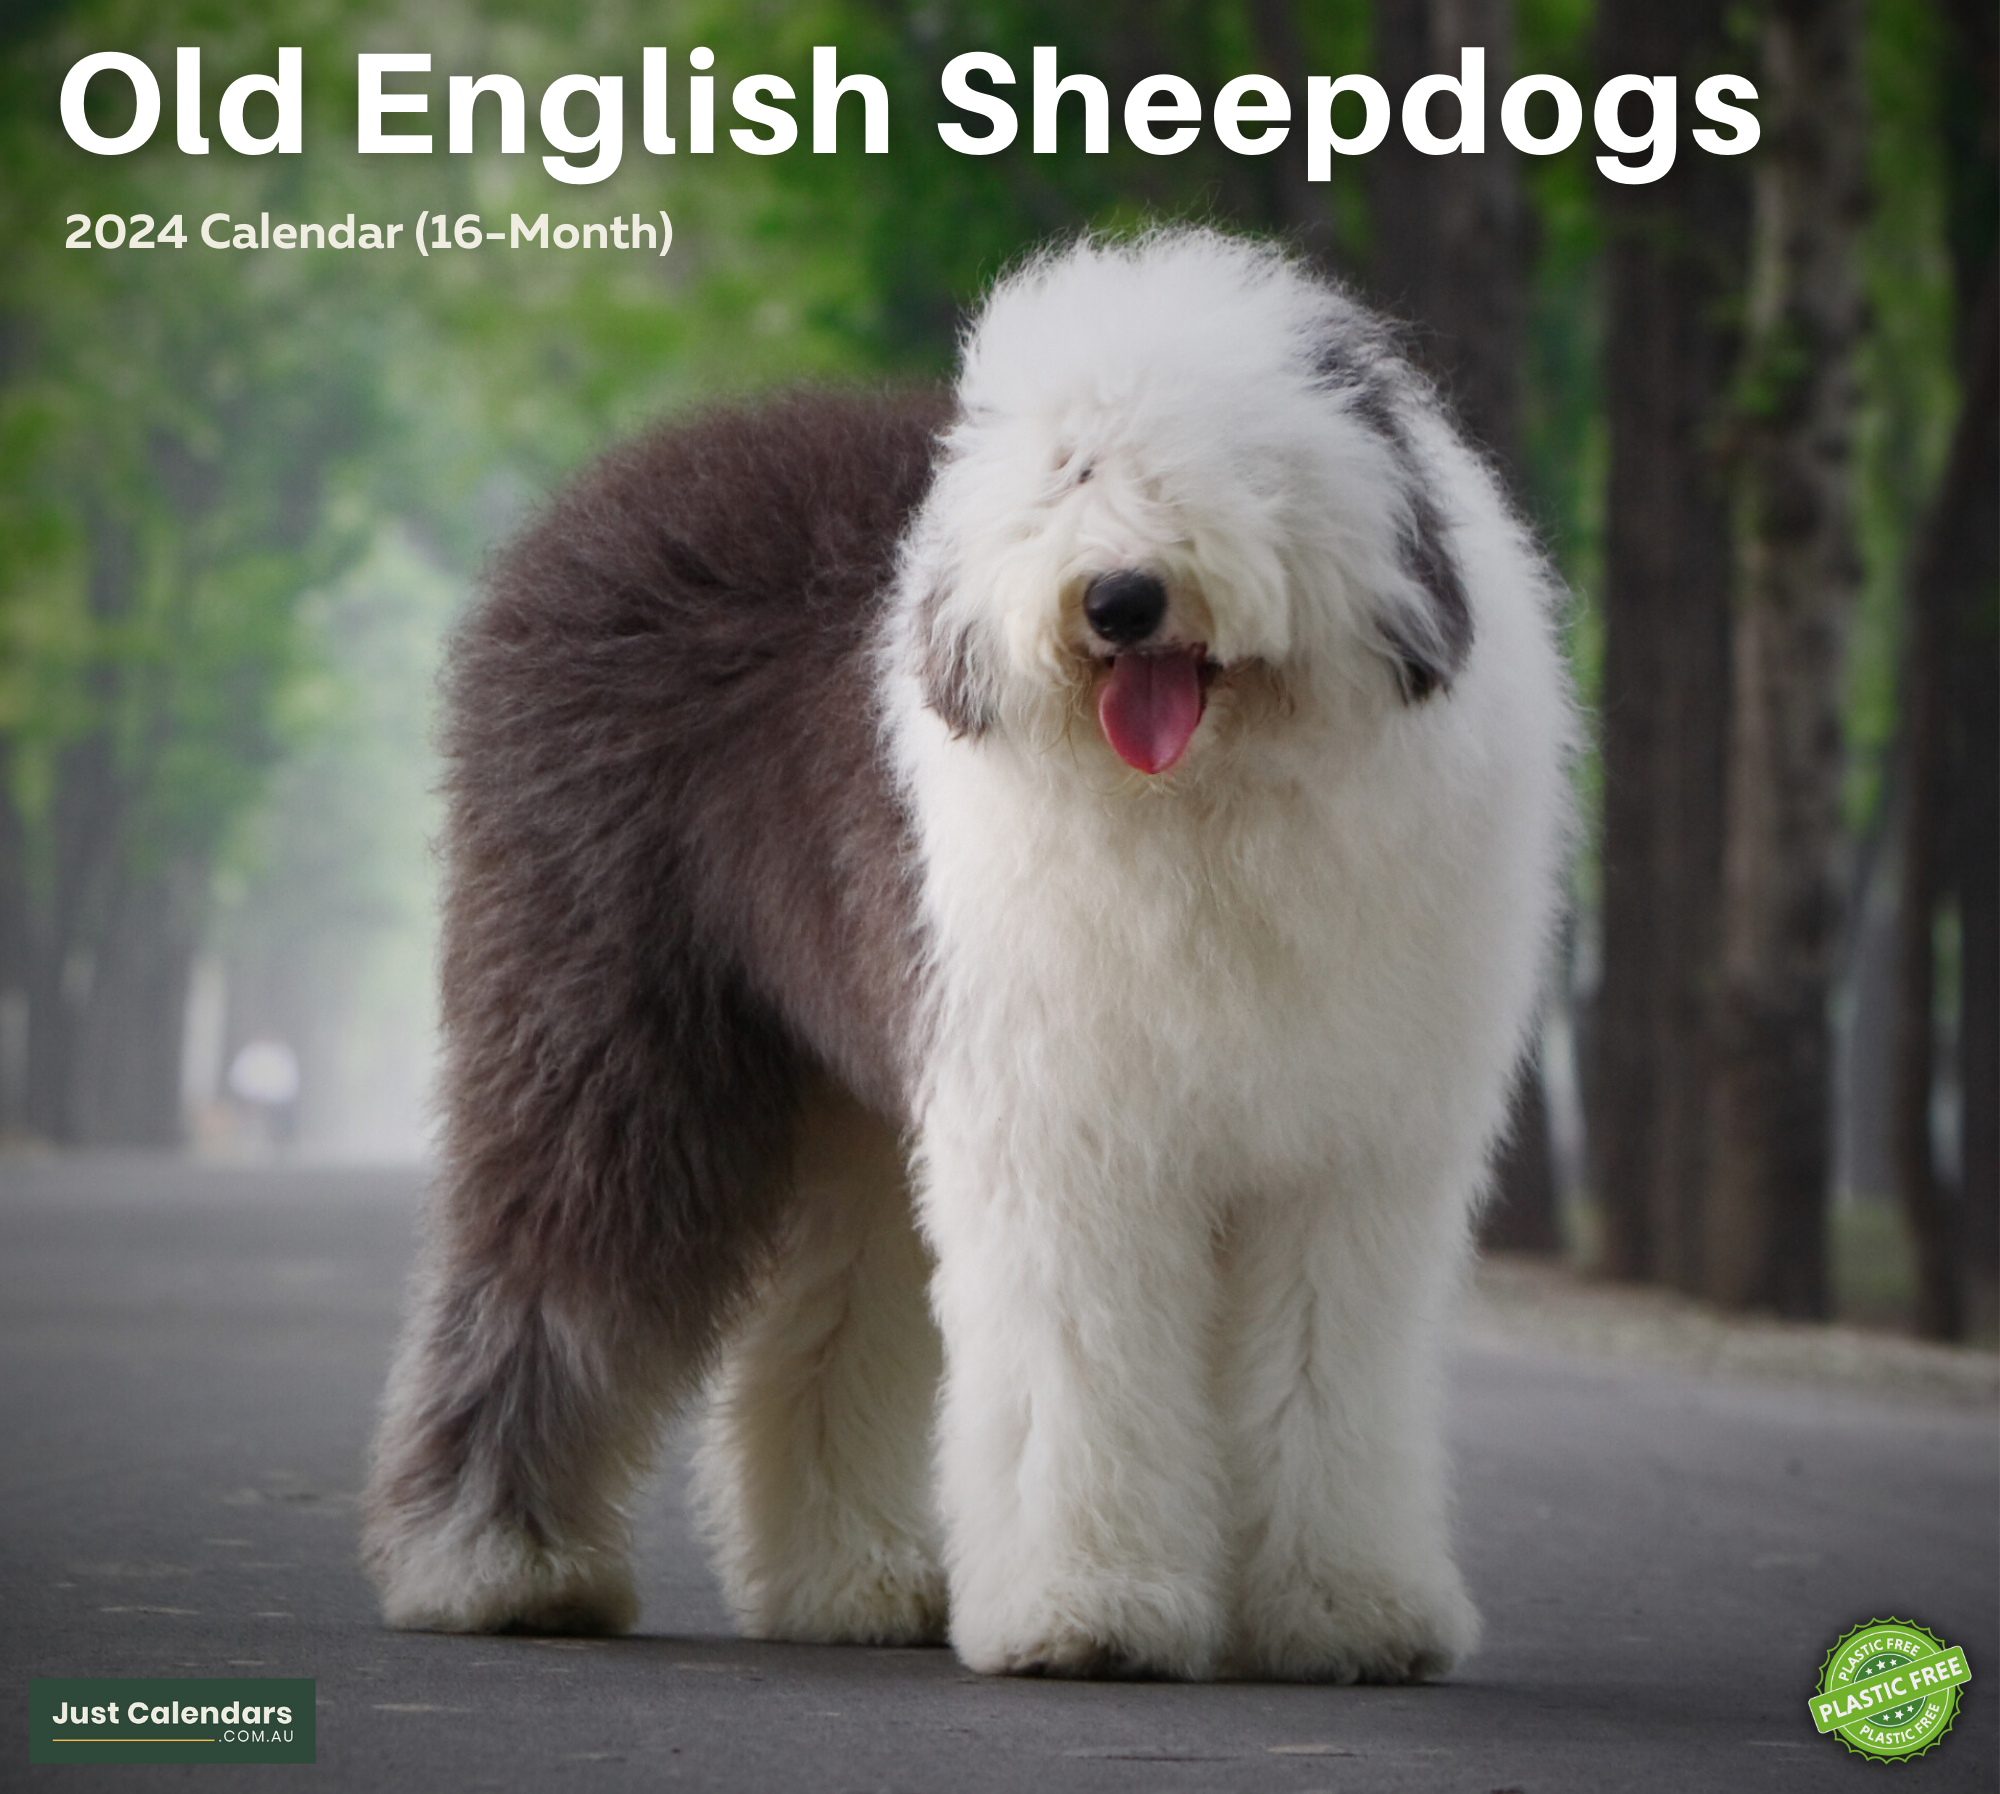 2024 Old English Sheepdogs Dogs & Puppies - Deluxe Wall Calendar by Just Calendars - 16 Month - Plastic Free